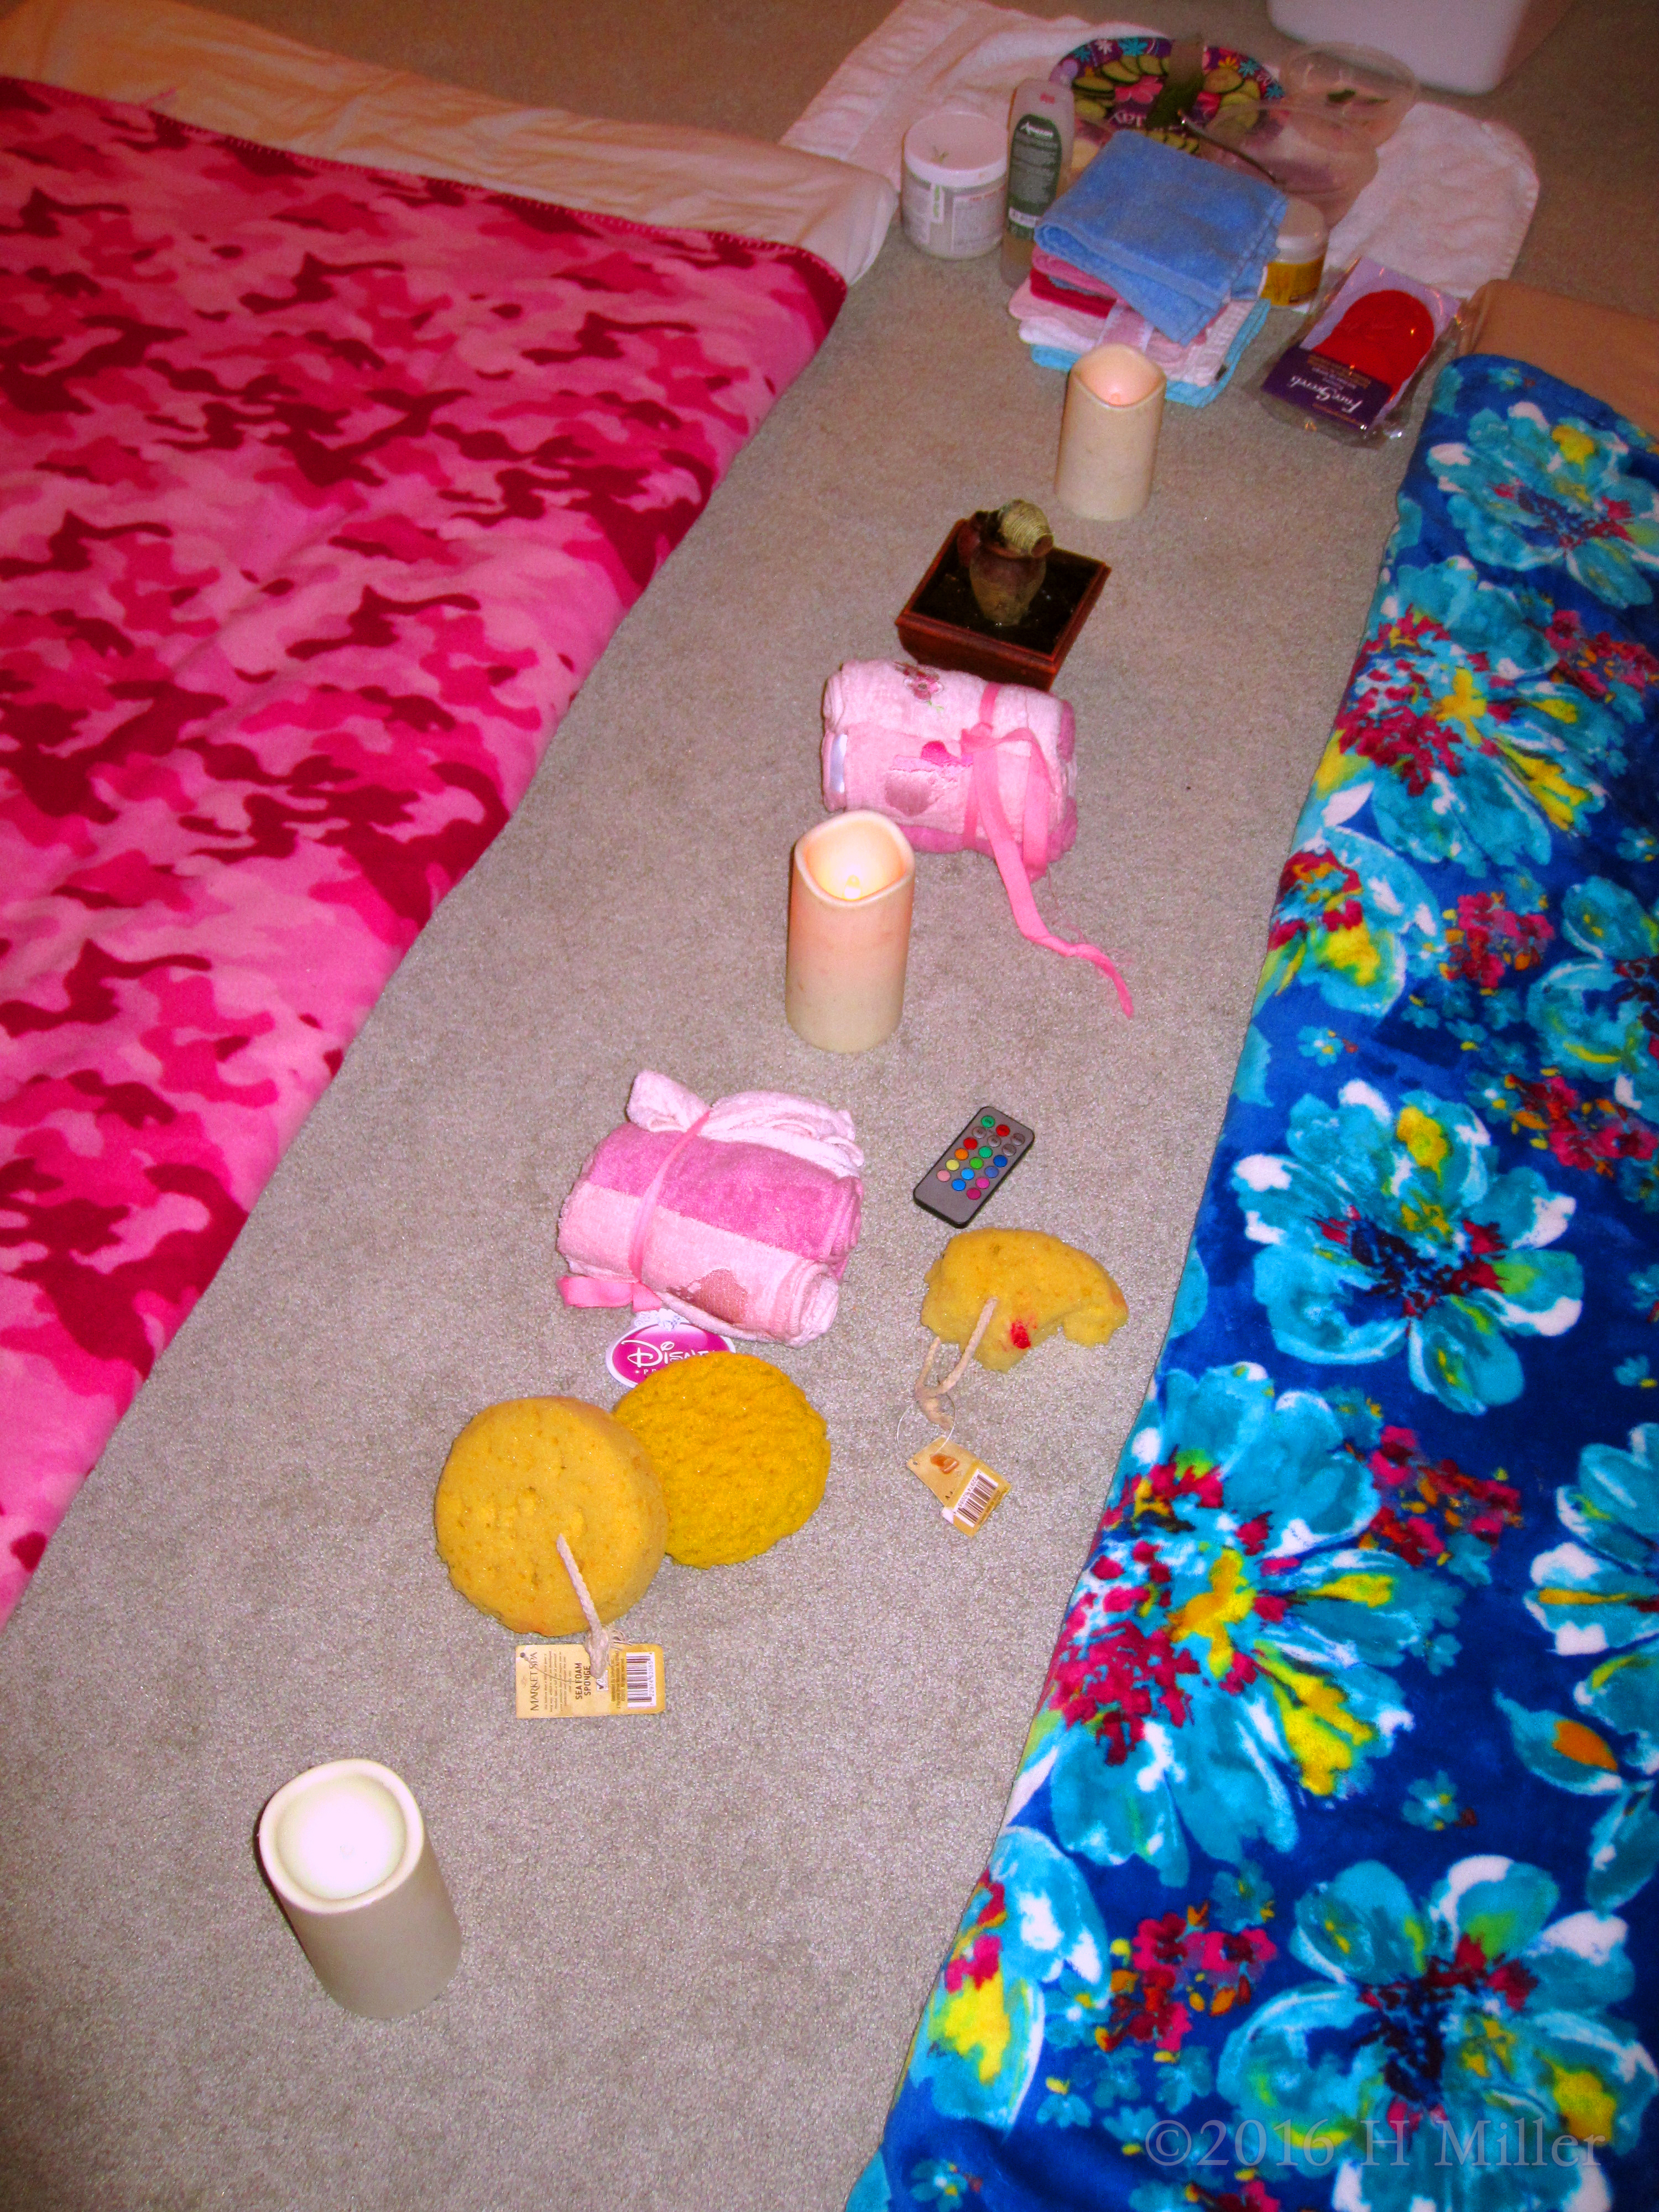 The Spa Treatment Area For Kids Facials And Massage Therapy. 